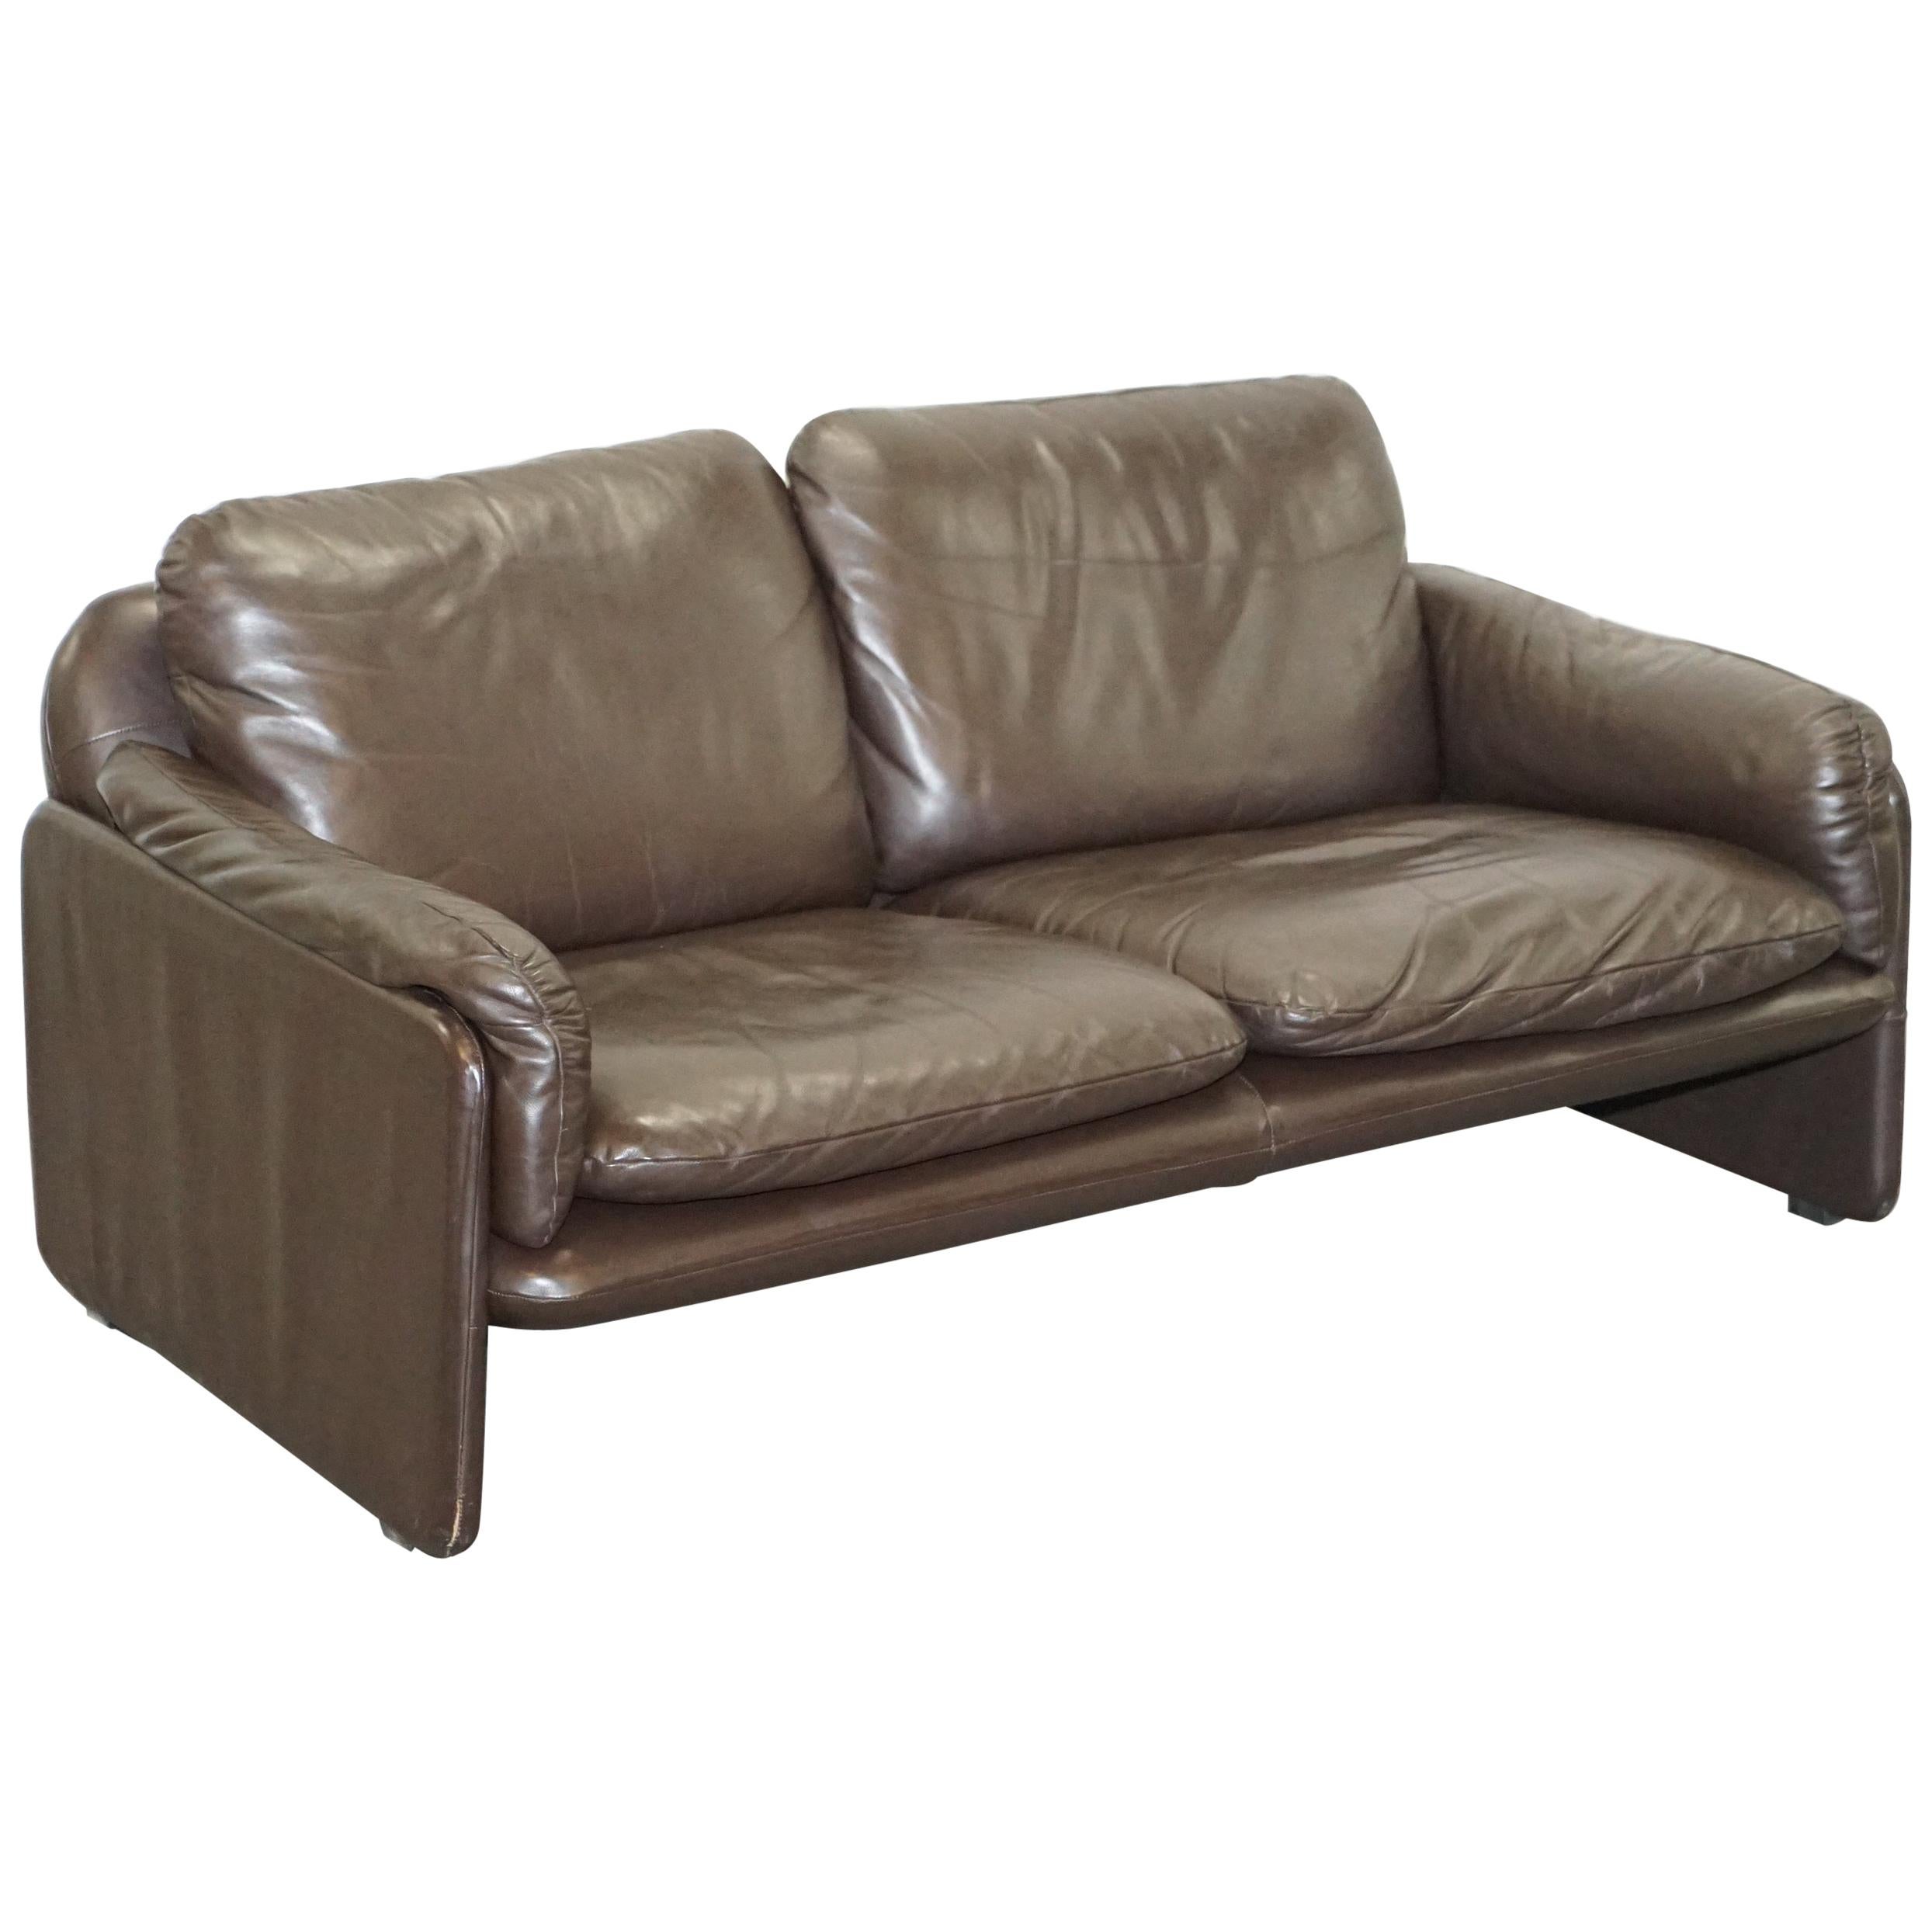 Danish Brown Leather 2 Seat Mid-Century Modern Sofa Armchairs Available